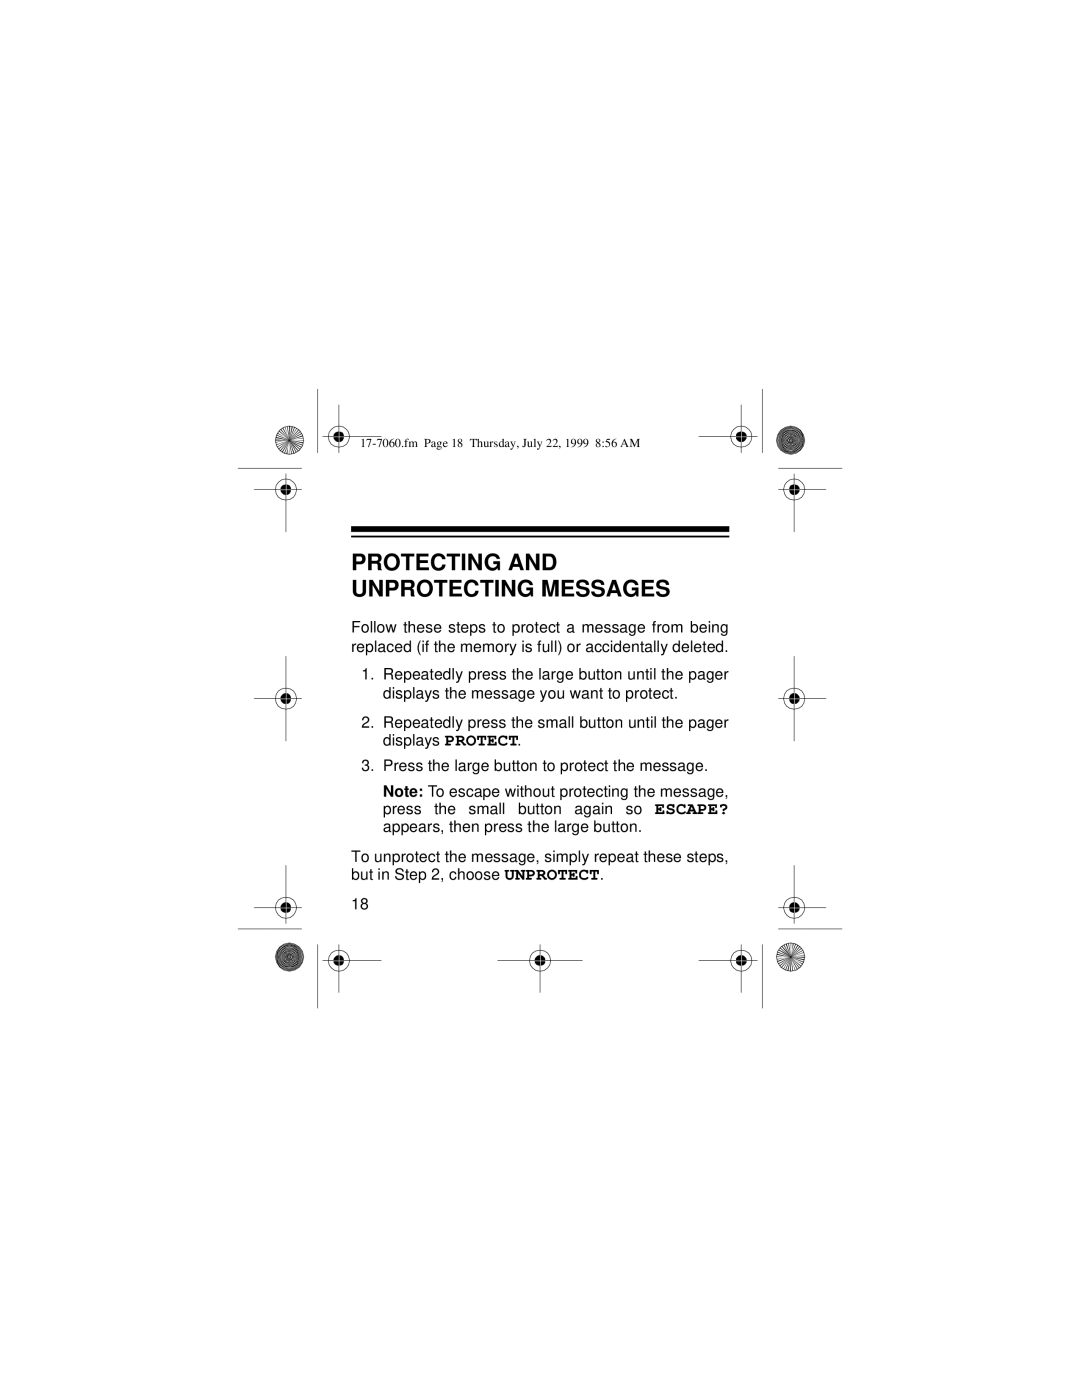 Radio Shack 17-7040, 17-7060 owner manual Protecting And Unprotecting Messages 